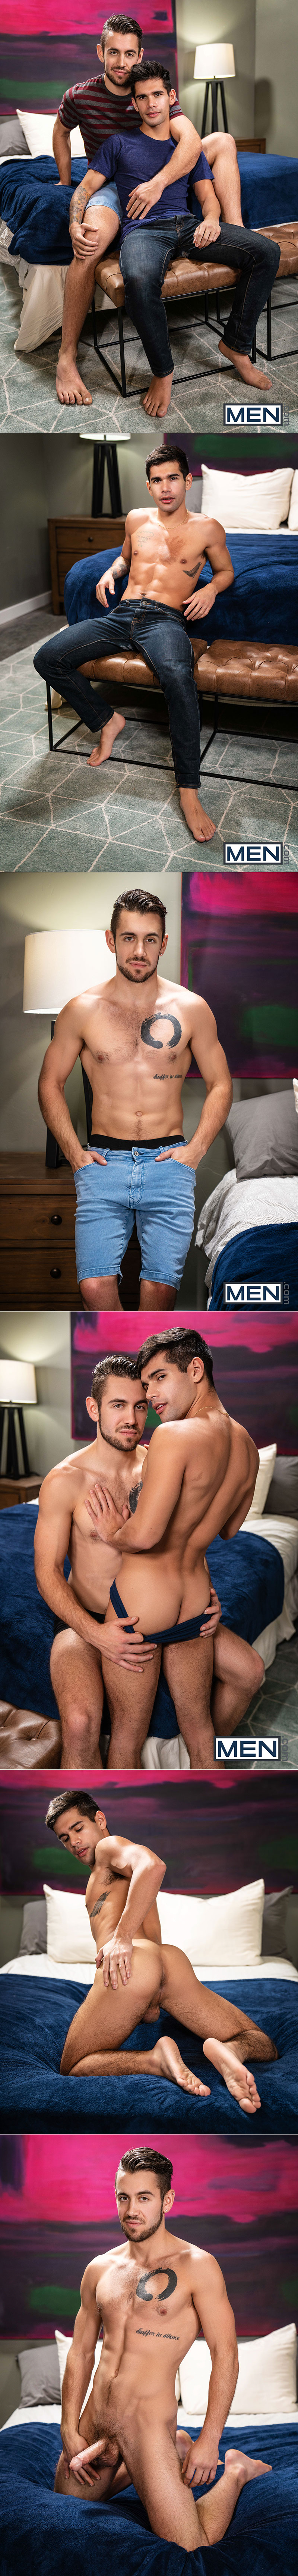 Men.com: Dante Colle barebacks Ty Mitchell in front of Reese Rideout in "Gaybors, Part 2"